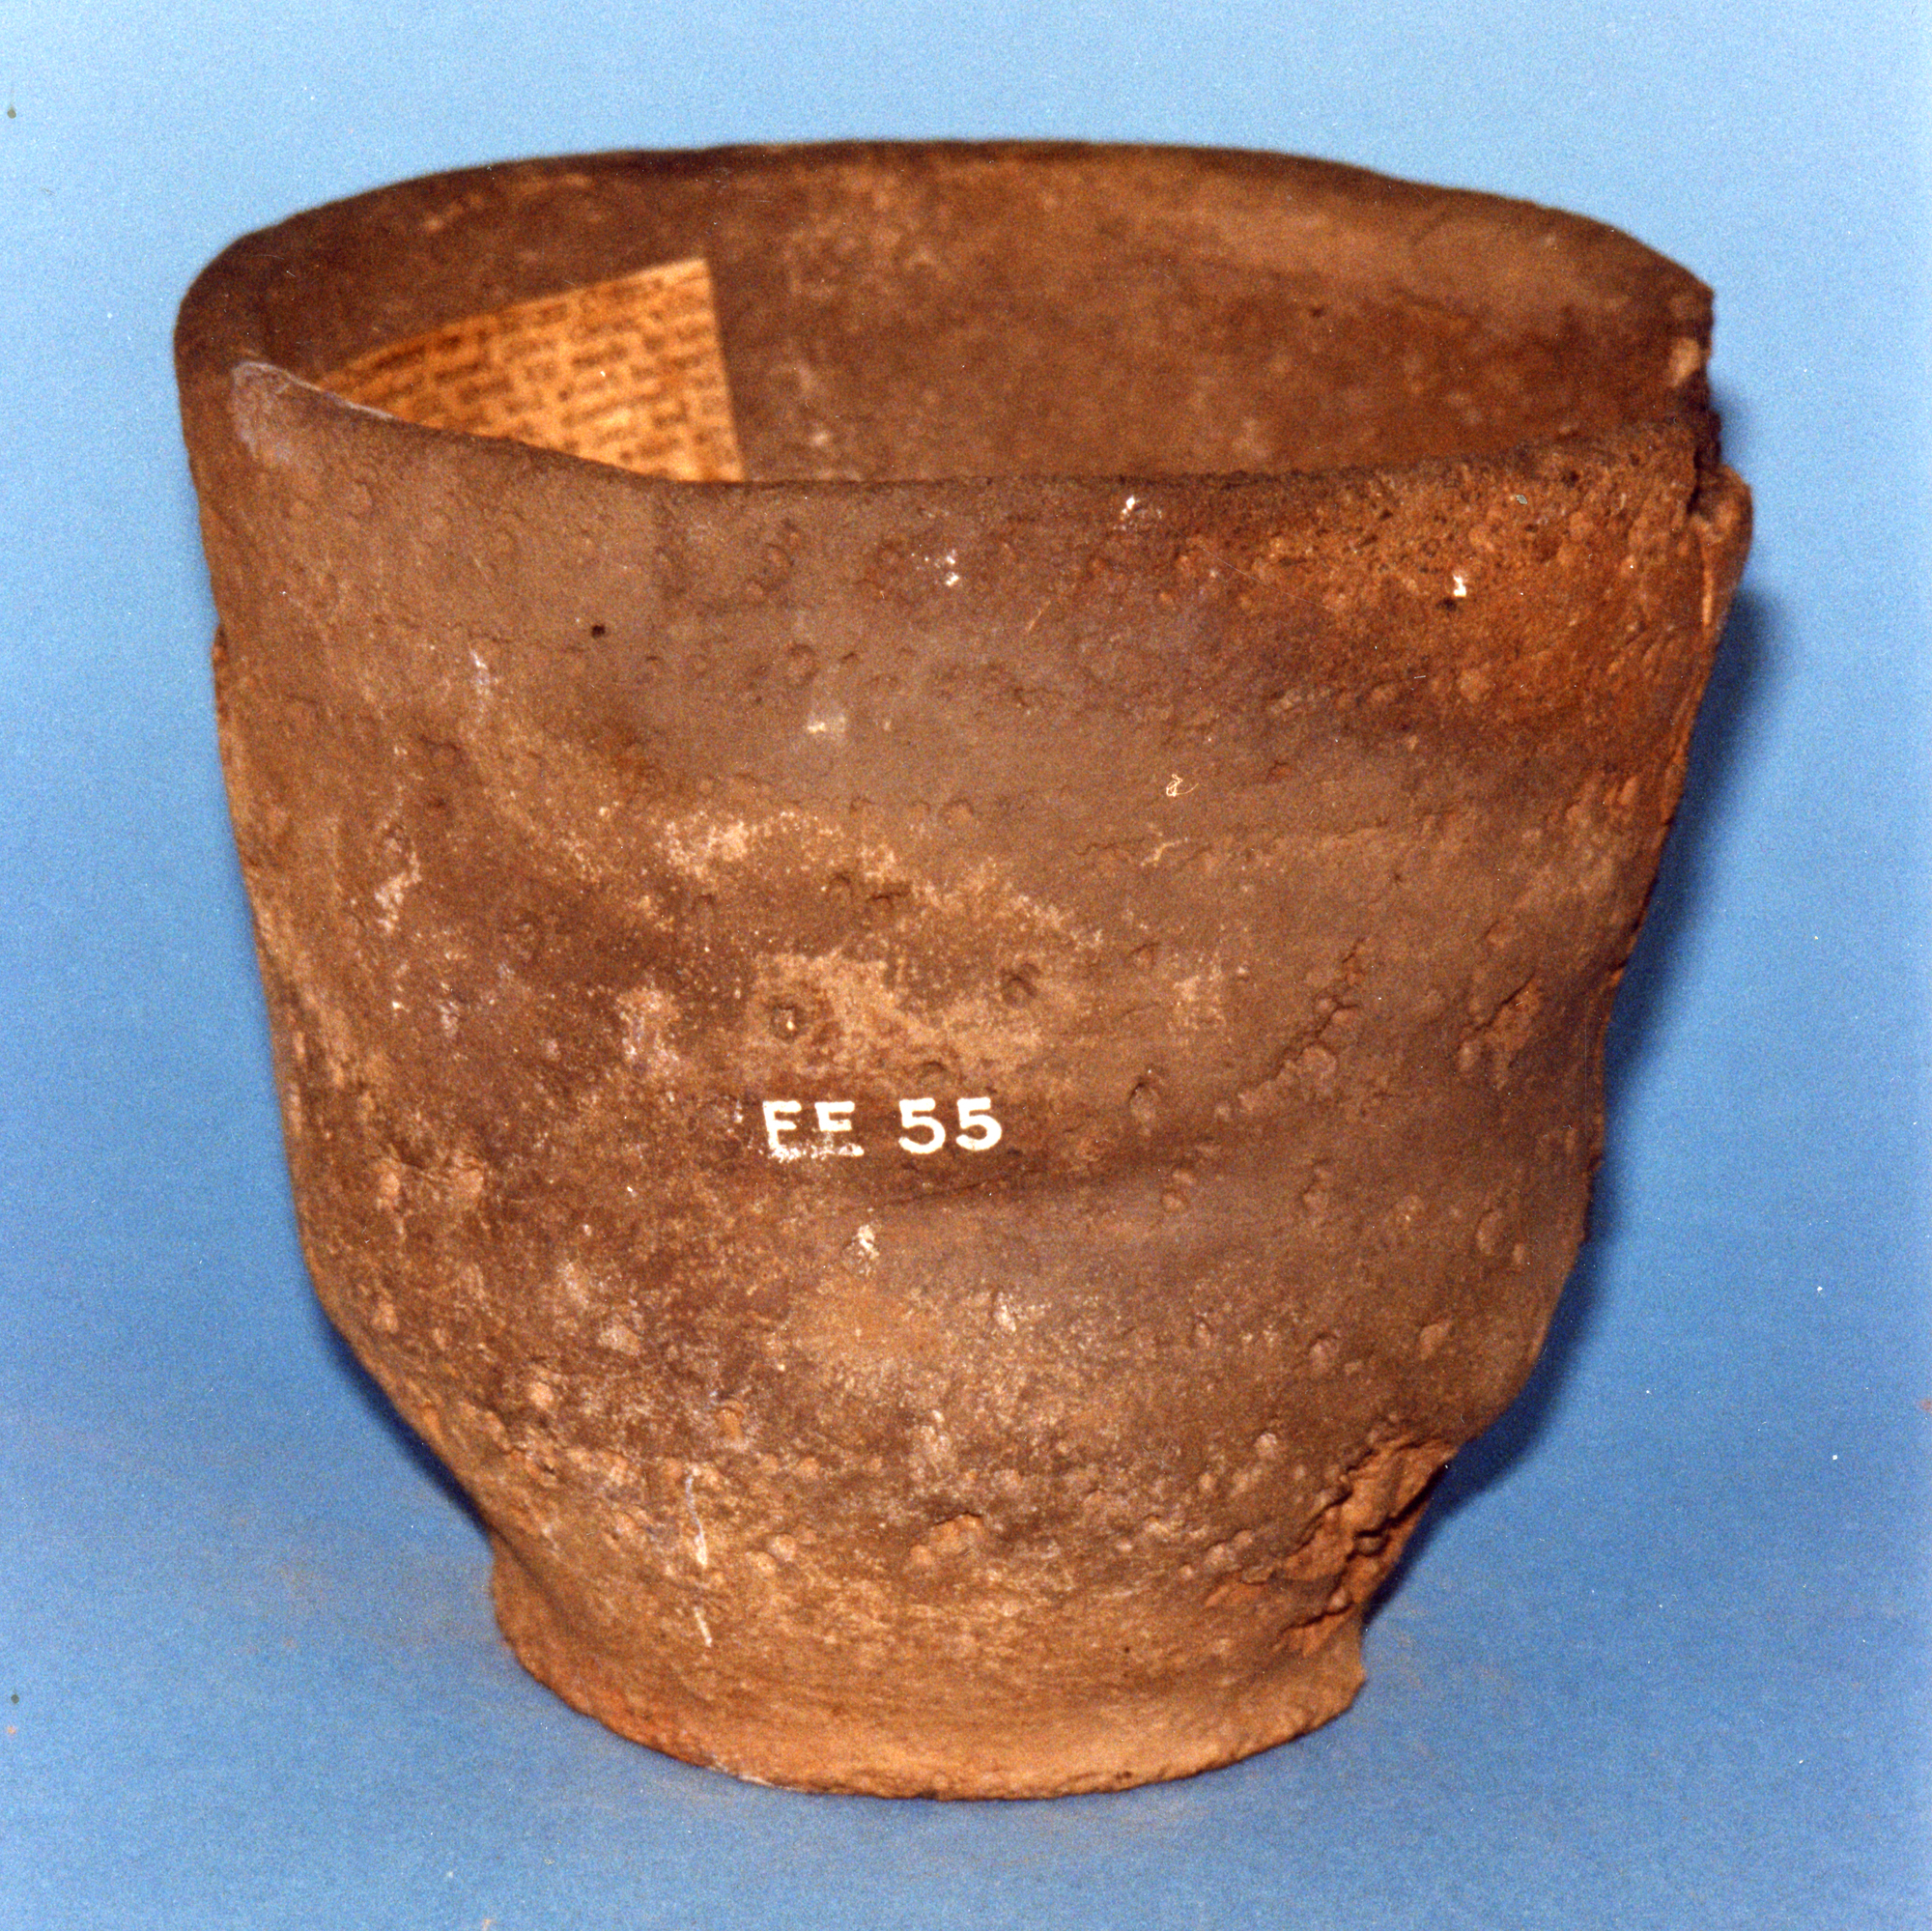 Image of Pottery food vessel from Cairn Robie, Lochlee, Angus © National Museums Scotland